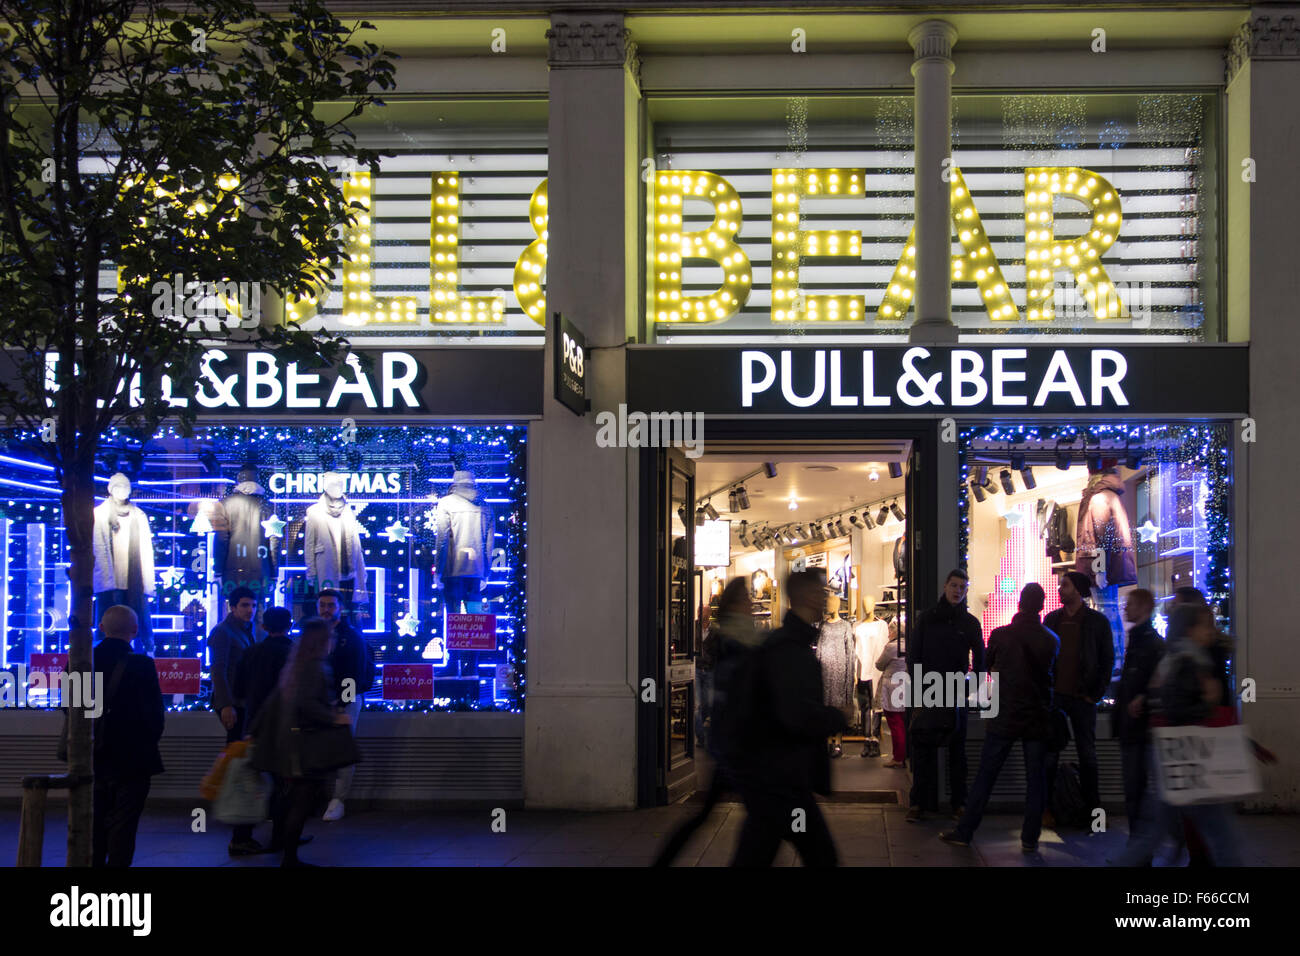 Pull And Bear Stock Photos Pull And Bear Stock Images 